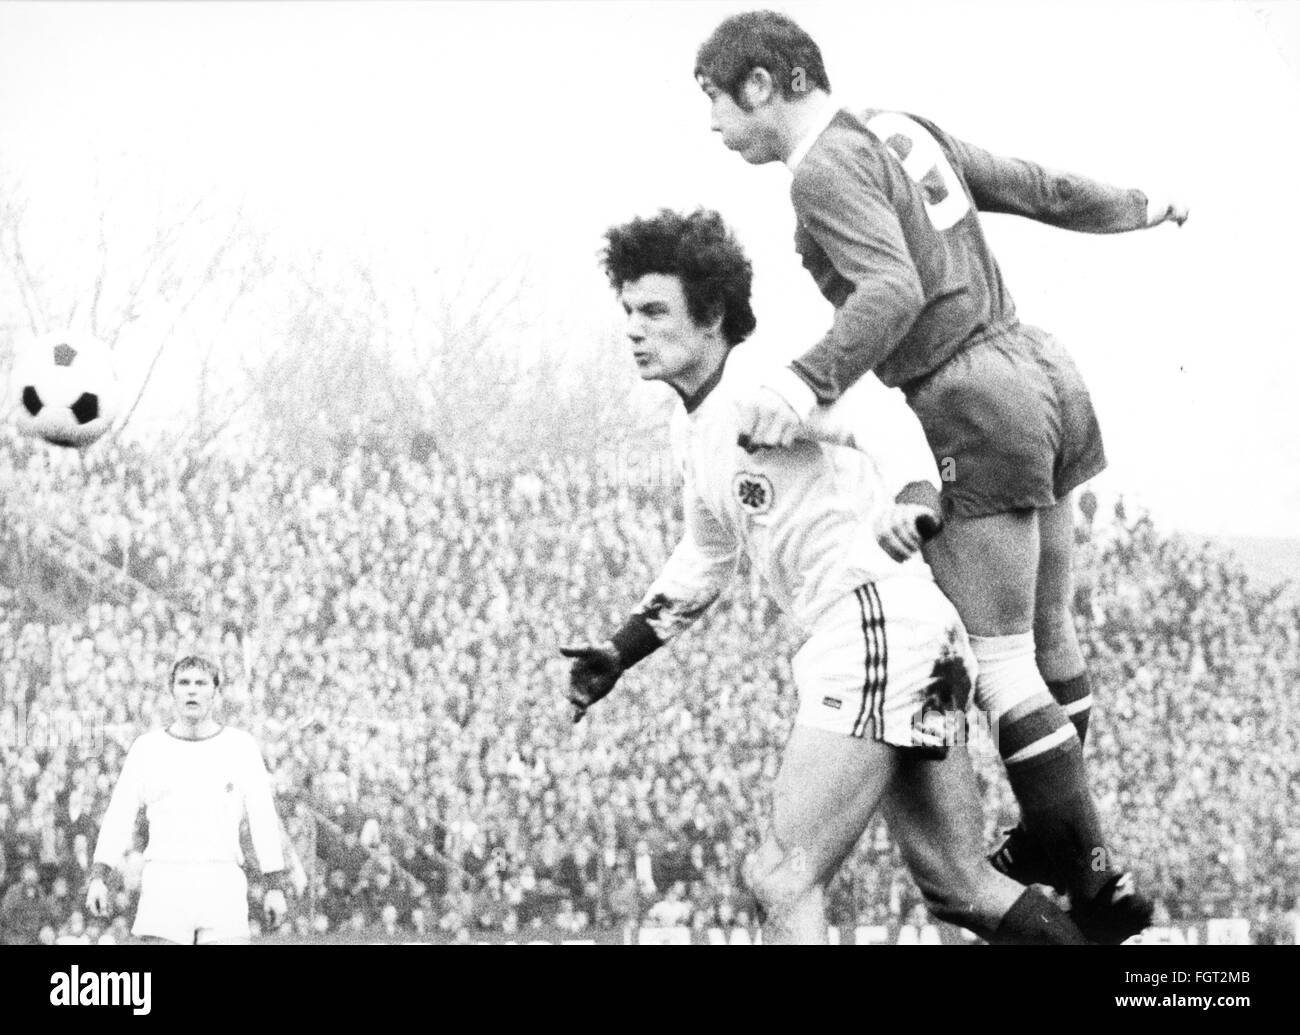 sports,football,games Germany,national league,season 1970 / 1971,14th match day,game FC Schalke 04 versus Rot-Weiss Oberhausen(2: zero),Glueaufkampfbahn,Gelsenkirchen,7.11.1970,2: 0 for Schlake by Klaus Fischer,right Reiner Hollmann,Rot Weiss,Glückauf-kampfbahn,Glückauf kampfbahn,physical,physical play,header,header shot,headers,header shots,duel,duels,football match,soccer match,football matches,footballer,footballers,kicker,football player,football players,action,act,actions,acts,ball,playing,play,West Germany,Western G,Additional-Rights-Clearences-Not Available Stock Photo